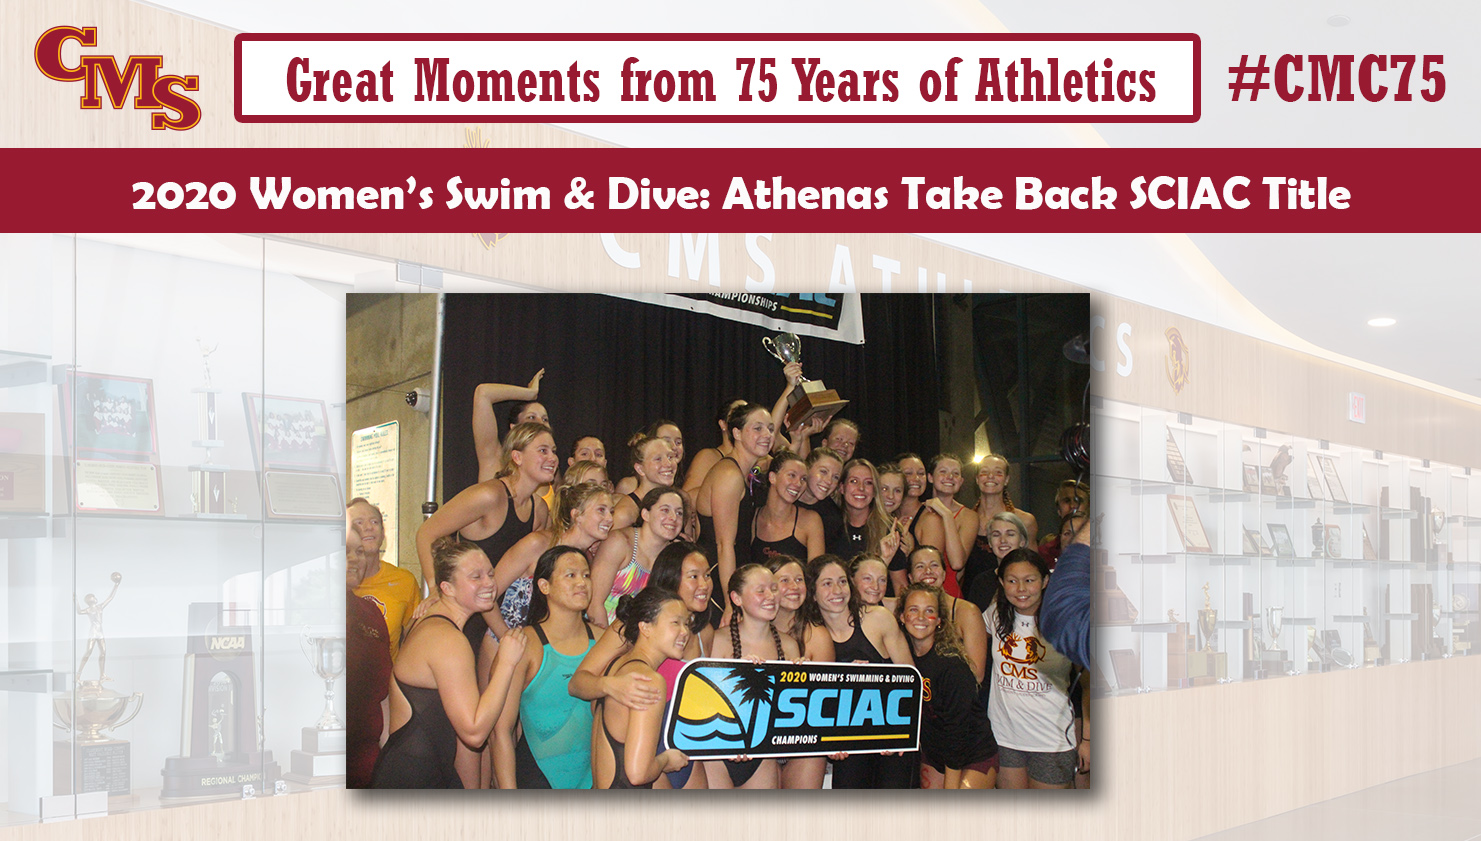 CMS celebrating with the SCIAC trophy. Words over the photo read: Great Moments from 75 Years of Athletics. 2020 Women's Swim & Dive: Athenas Take Back SCIAC Title